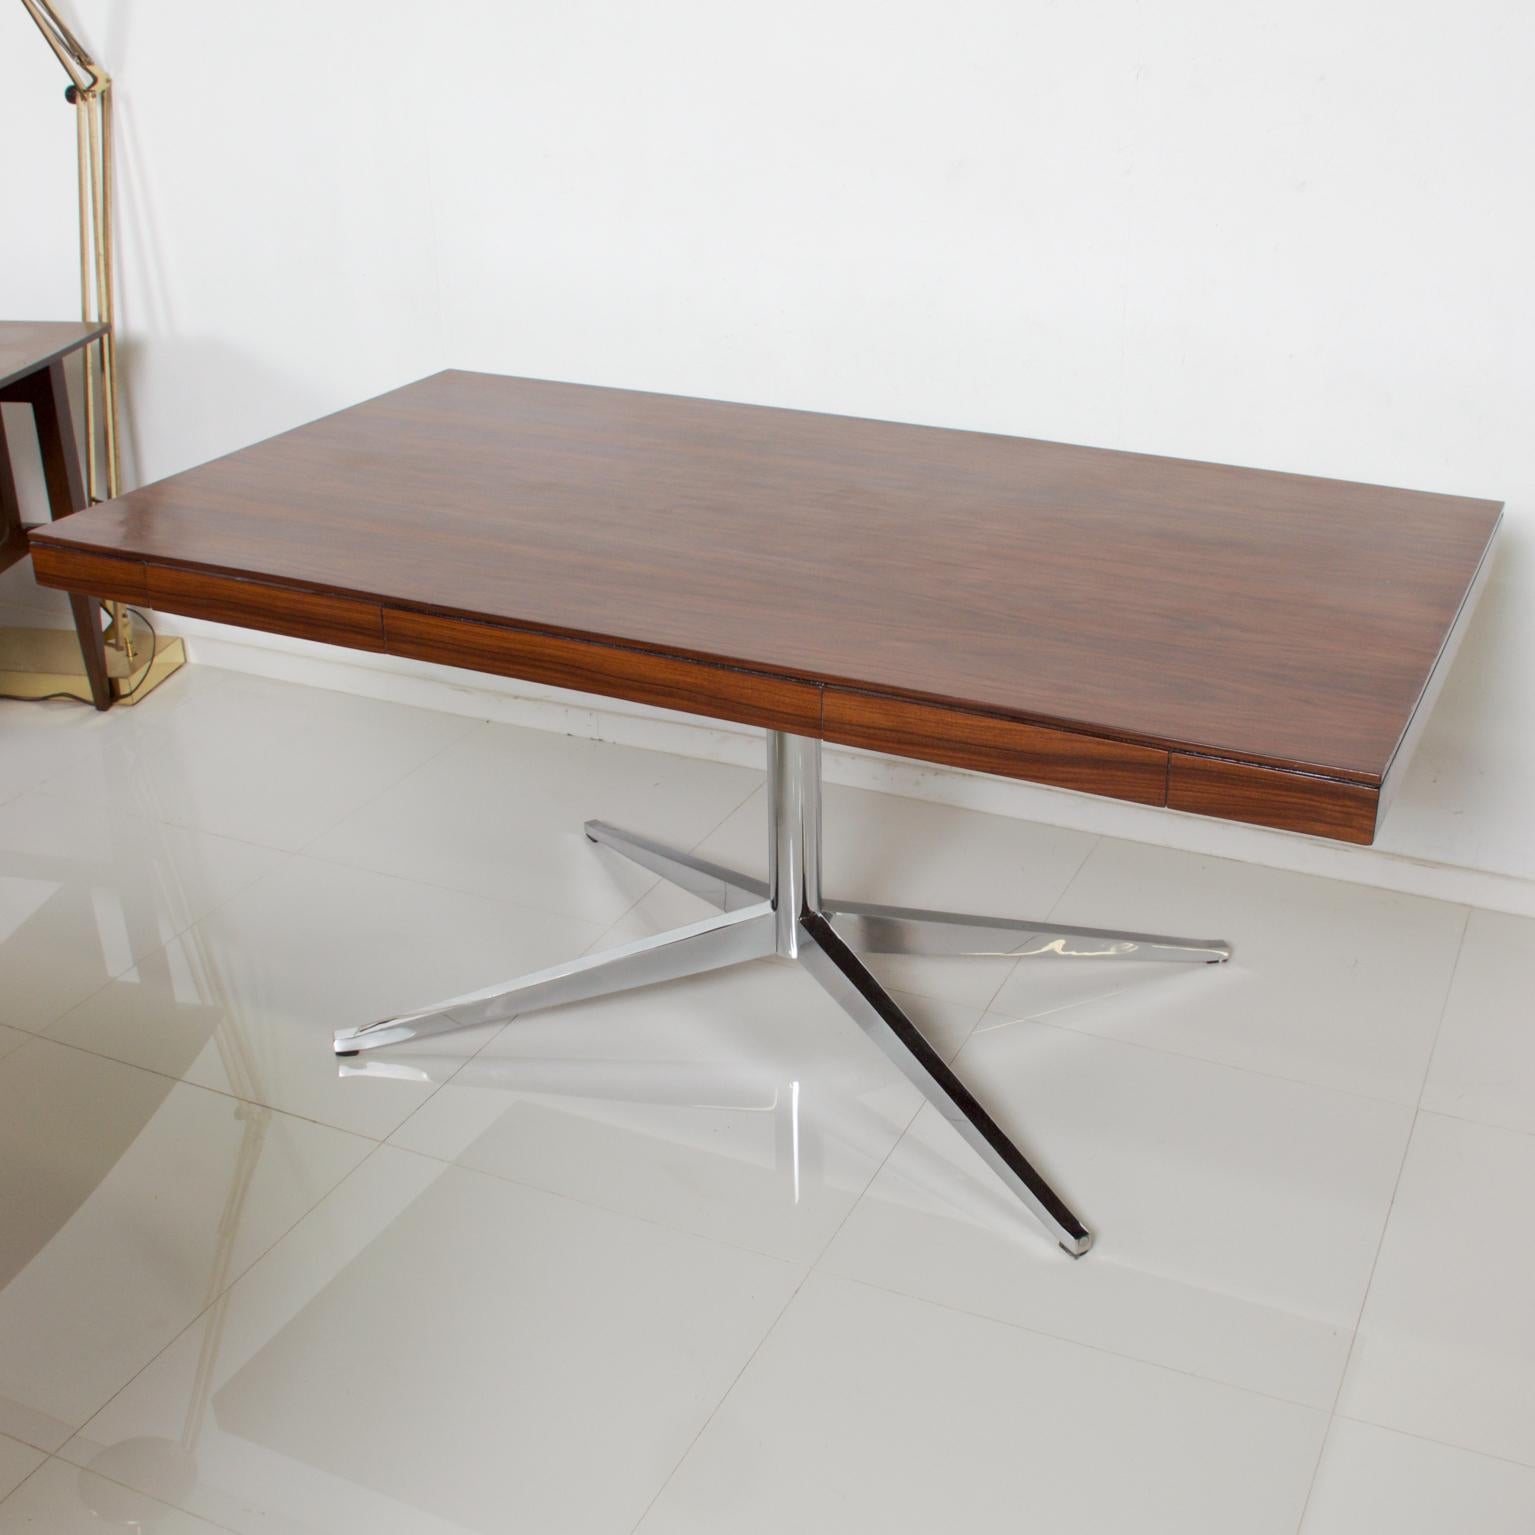 Florence KNOLL Executive Partners DESK Rosewood w/ Chrome Legs Refined Classic 2